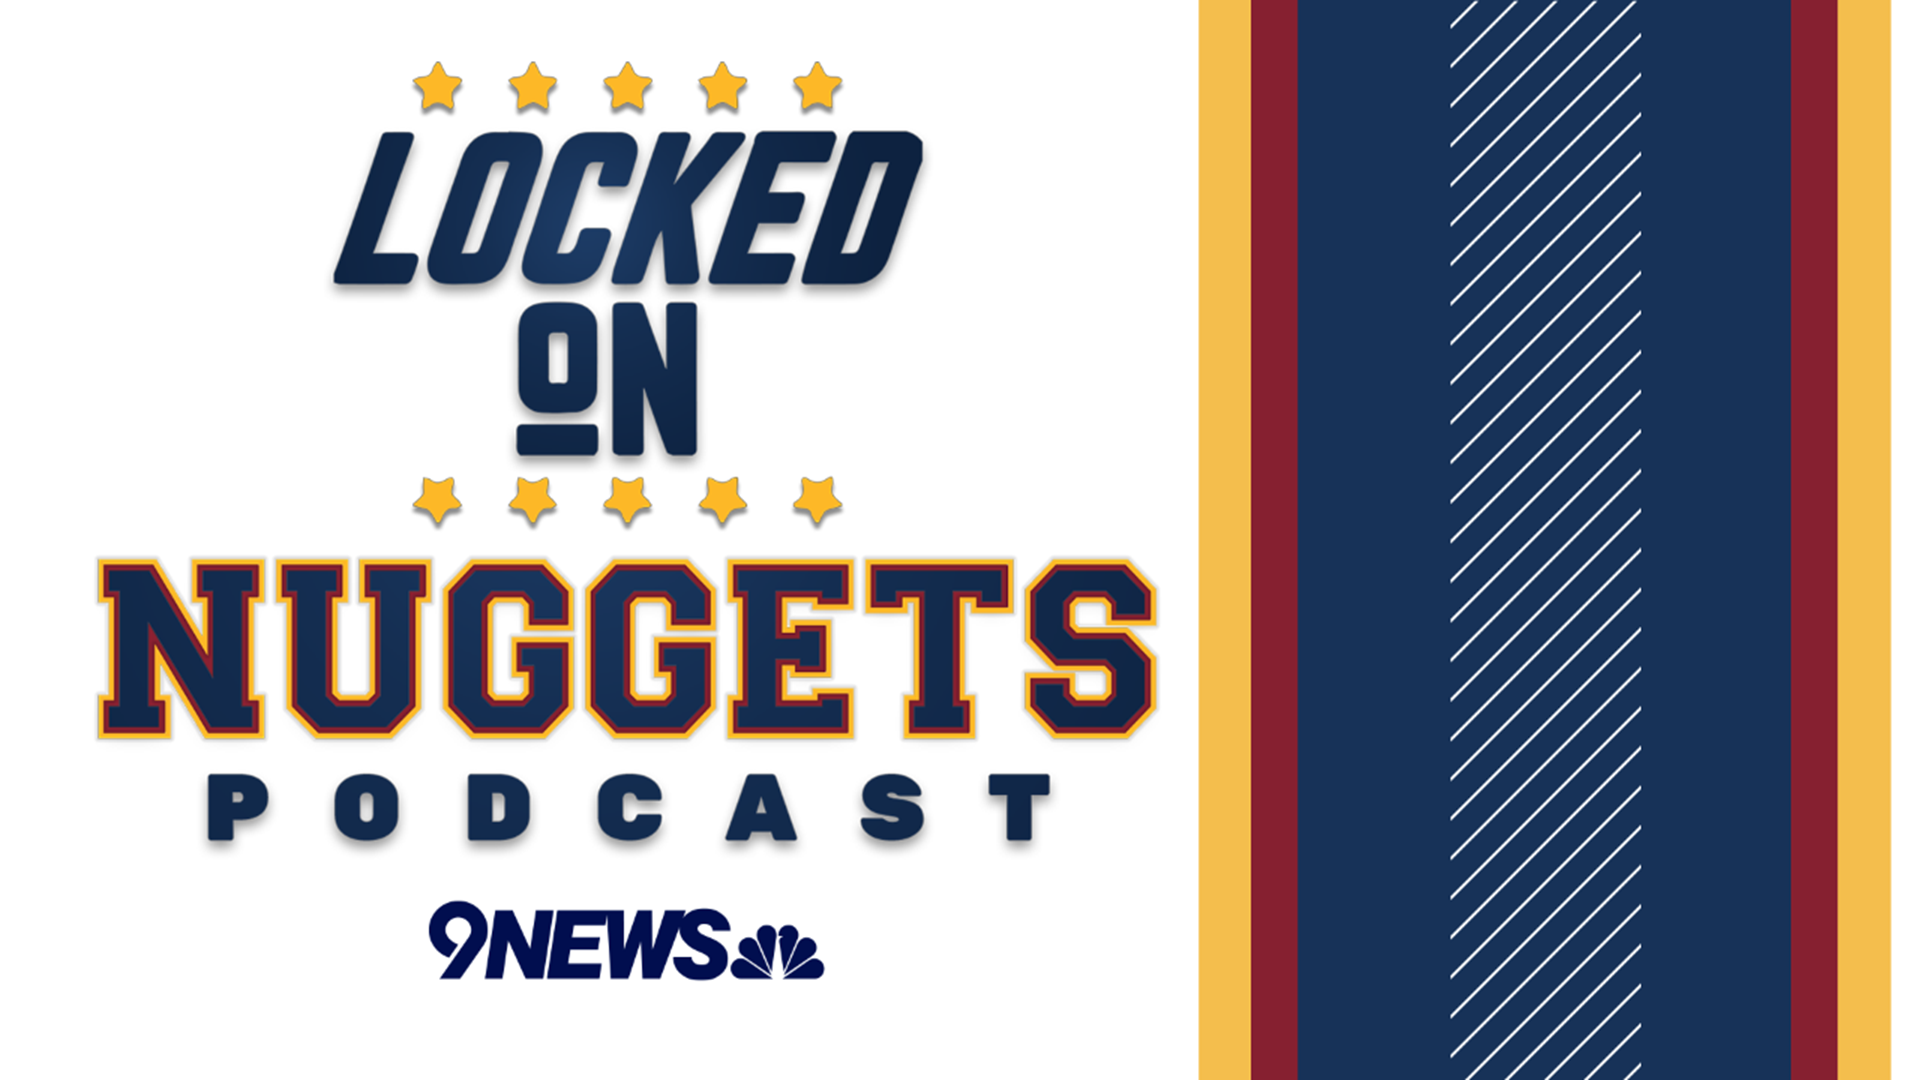 The Locked On Nuggets podcast team talks about the latest developments in the NBA offseason.